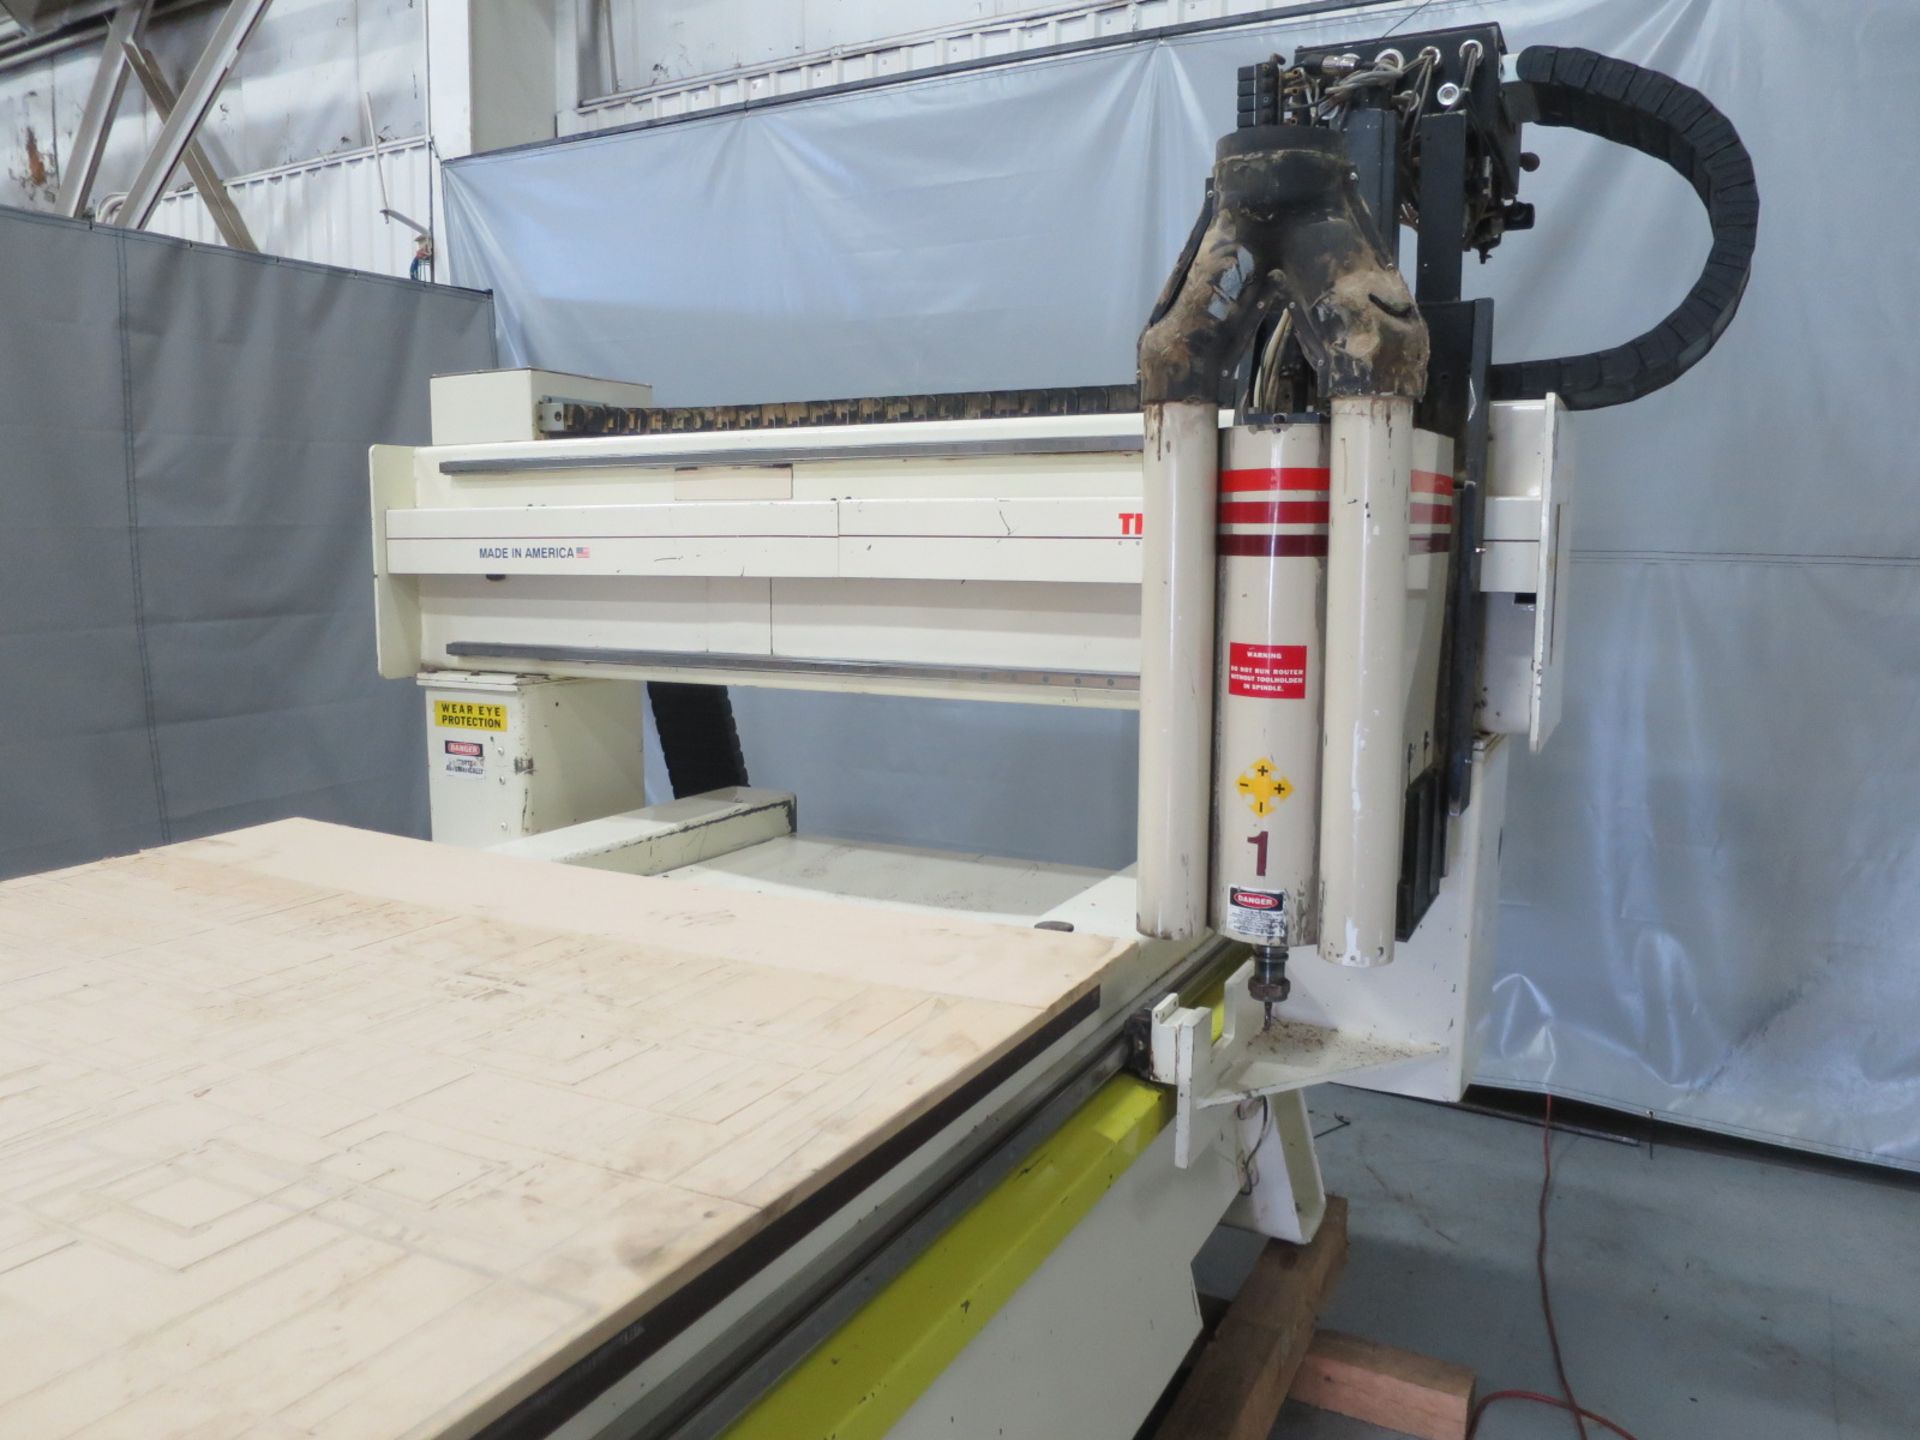 5'X10' Thermwood C53 3-Axis CNC Router w/Qcore Upgrade, , S/N C530550596, New 1996, - Image 3 of 6